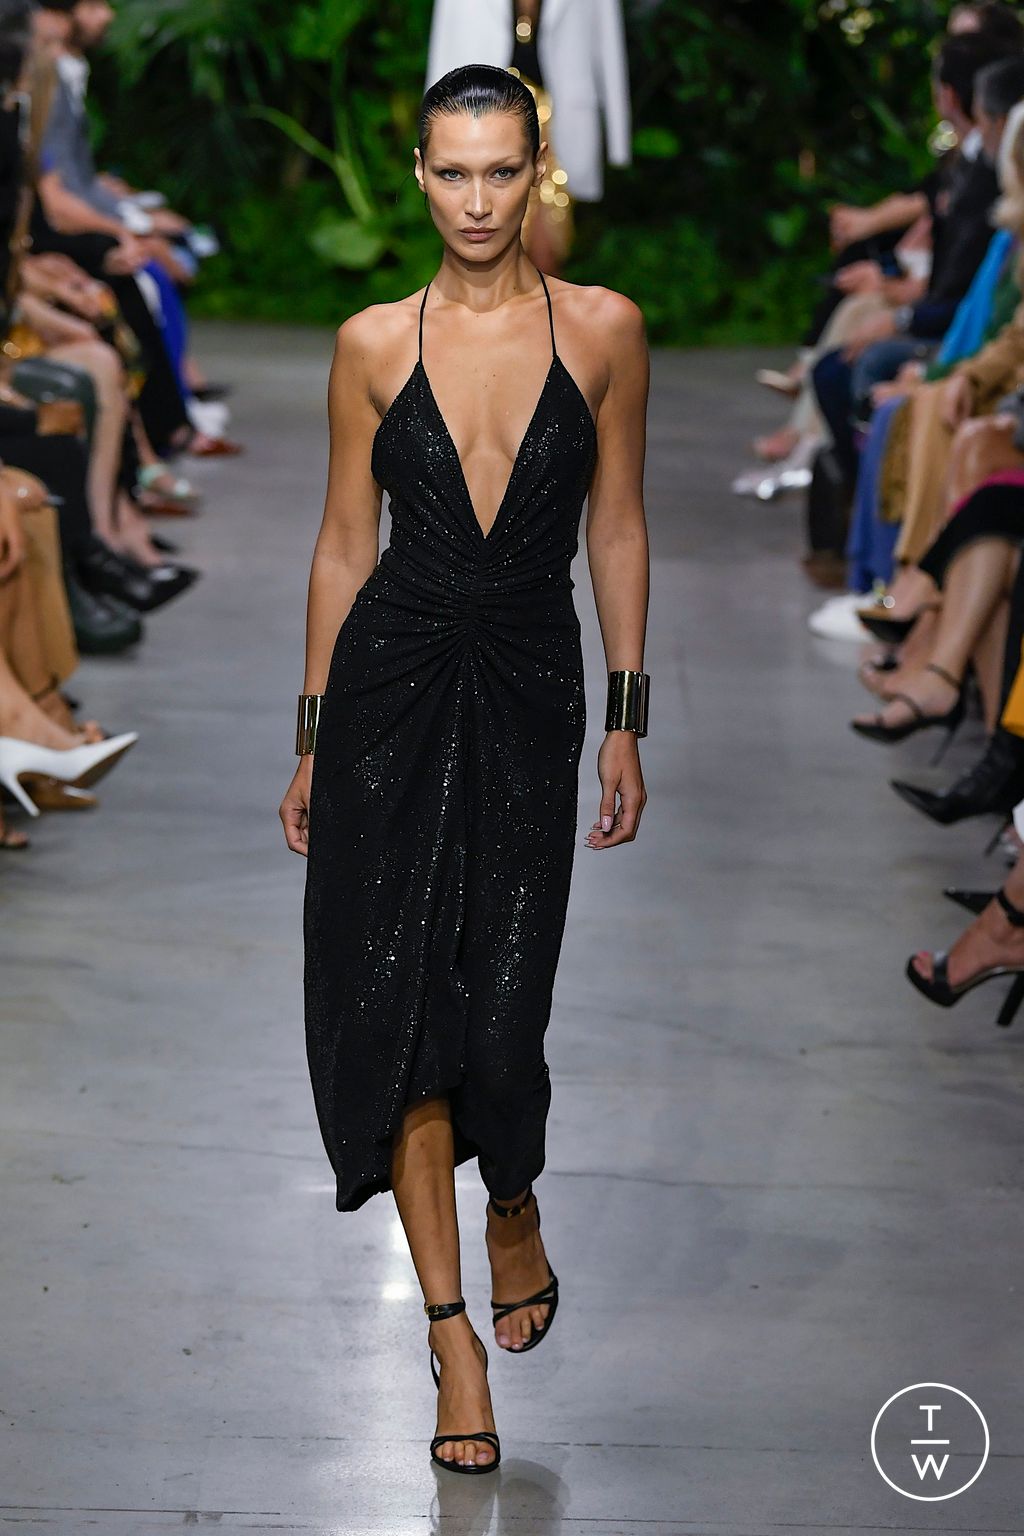 Michael Kors serves up sunshine and wit at New York fashion week  New York  fashion week springsummer 2019 NYFW  The Guardian